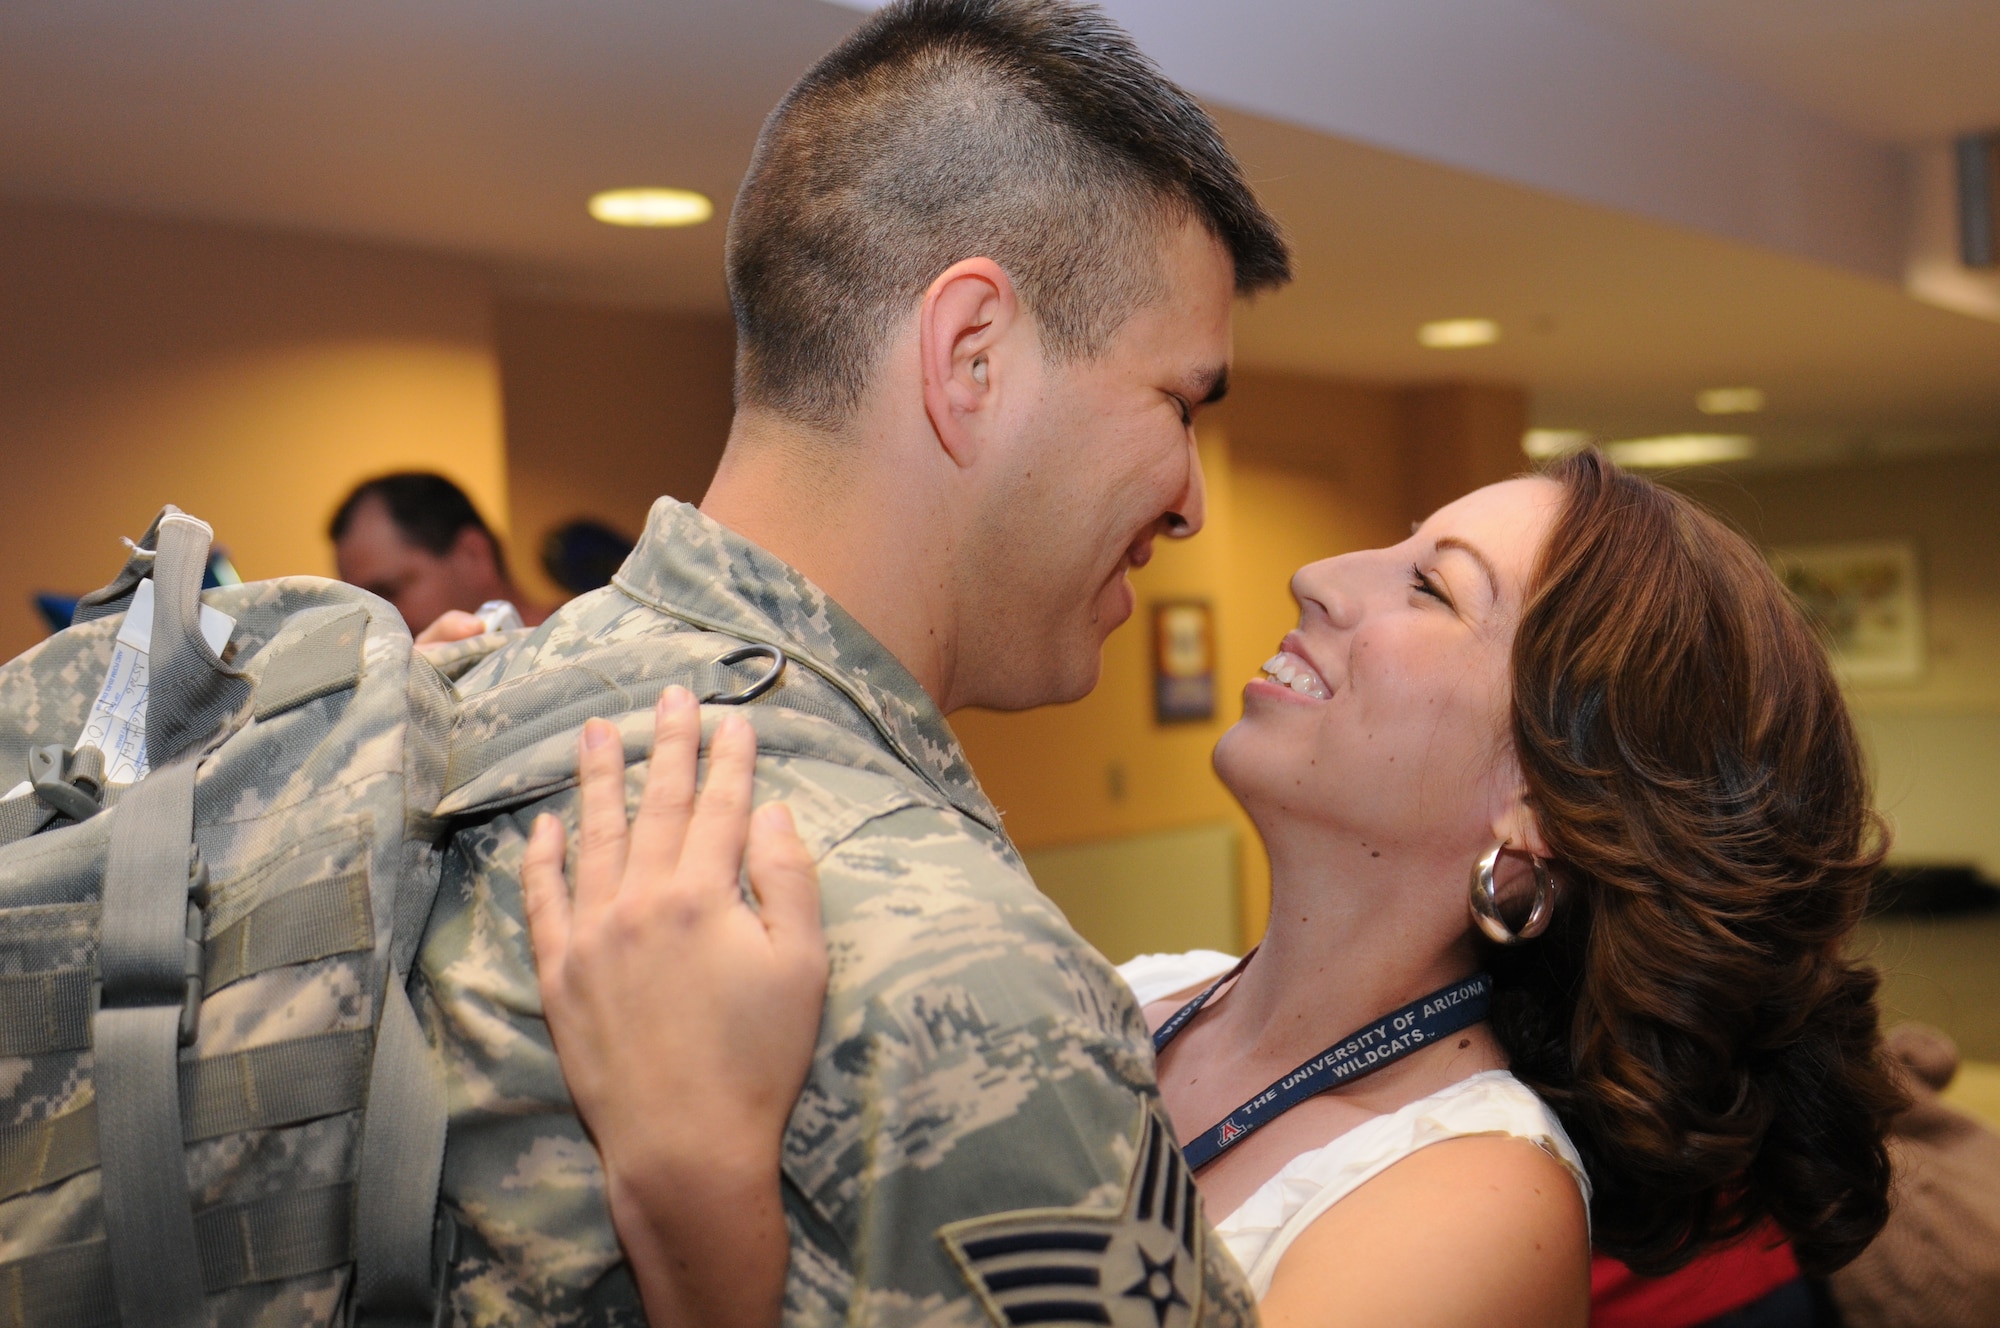 Senior Airman Francisco Rodriguez is welcomed home after a five-month deployment to Iraq, June 6. Family and friends celebrated the return of 29 security forces Airmen assigned to the 162nd Fighter Wing at Tucson International Airport. (Air Force photo by Maj. Gabe Johnson) 